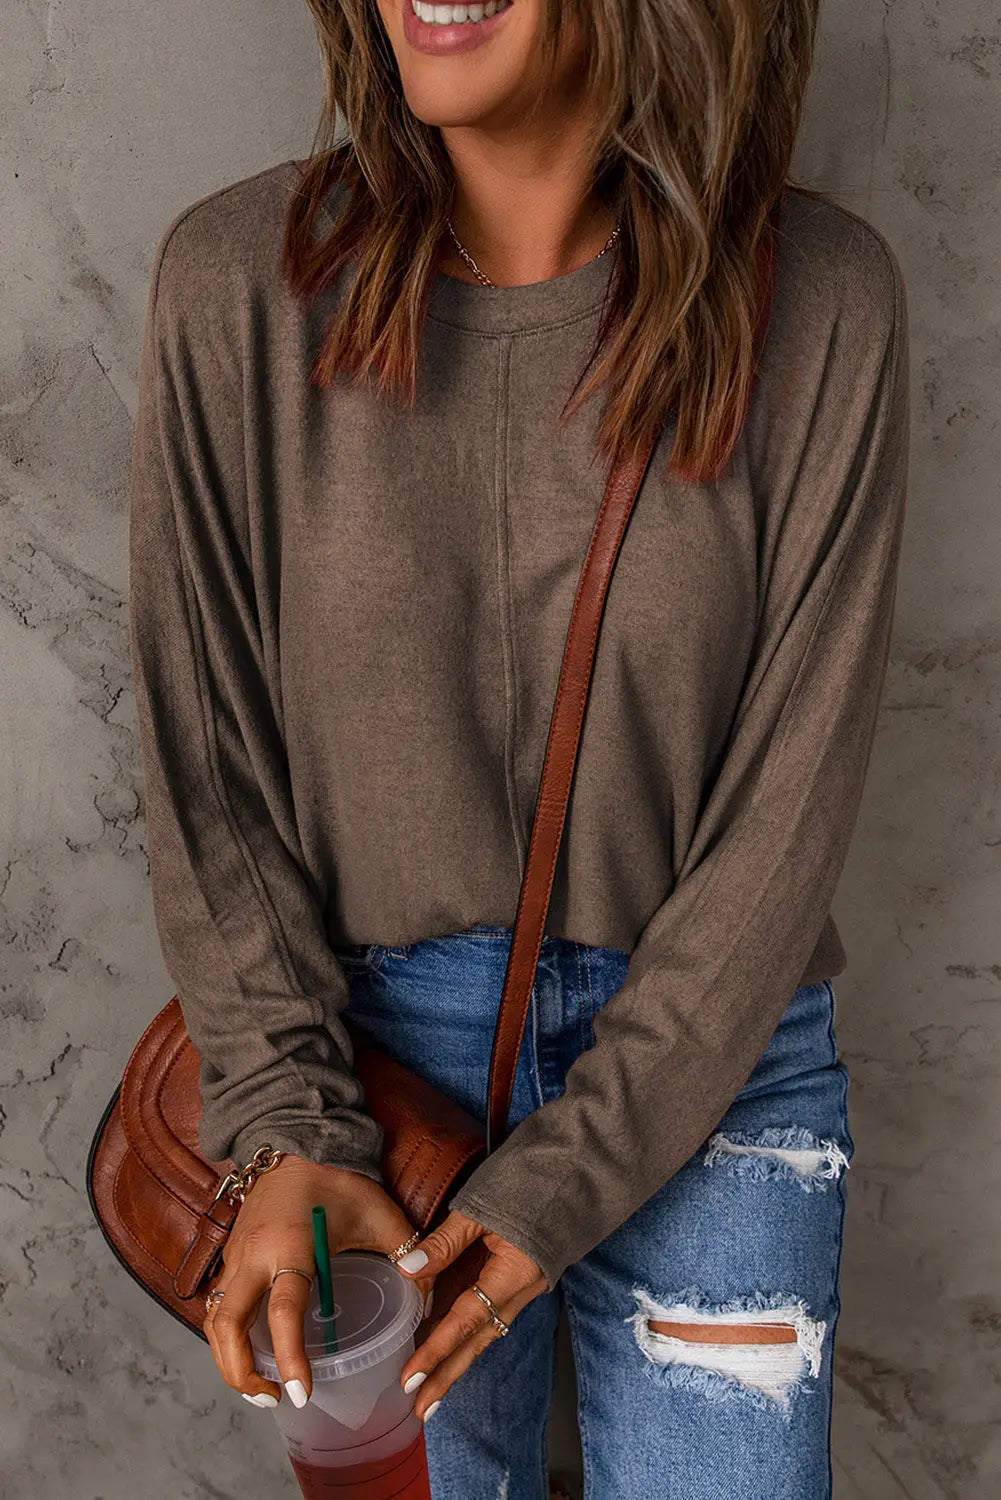 Brown fiery solid color patchwork long sleeve top - tops